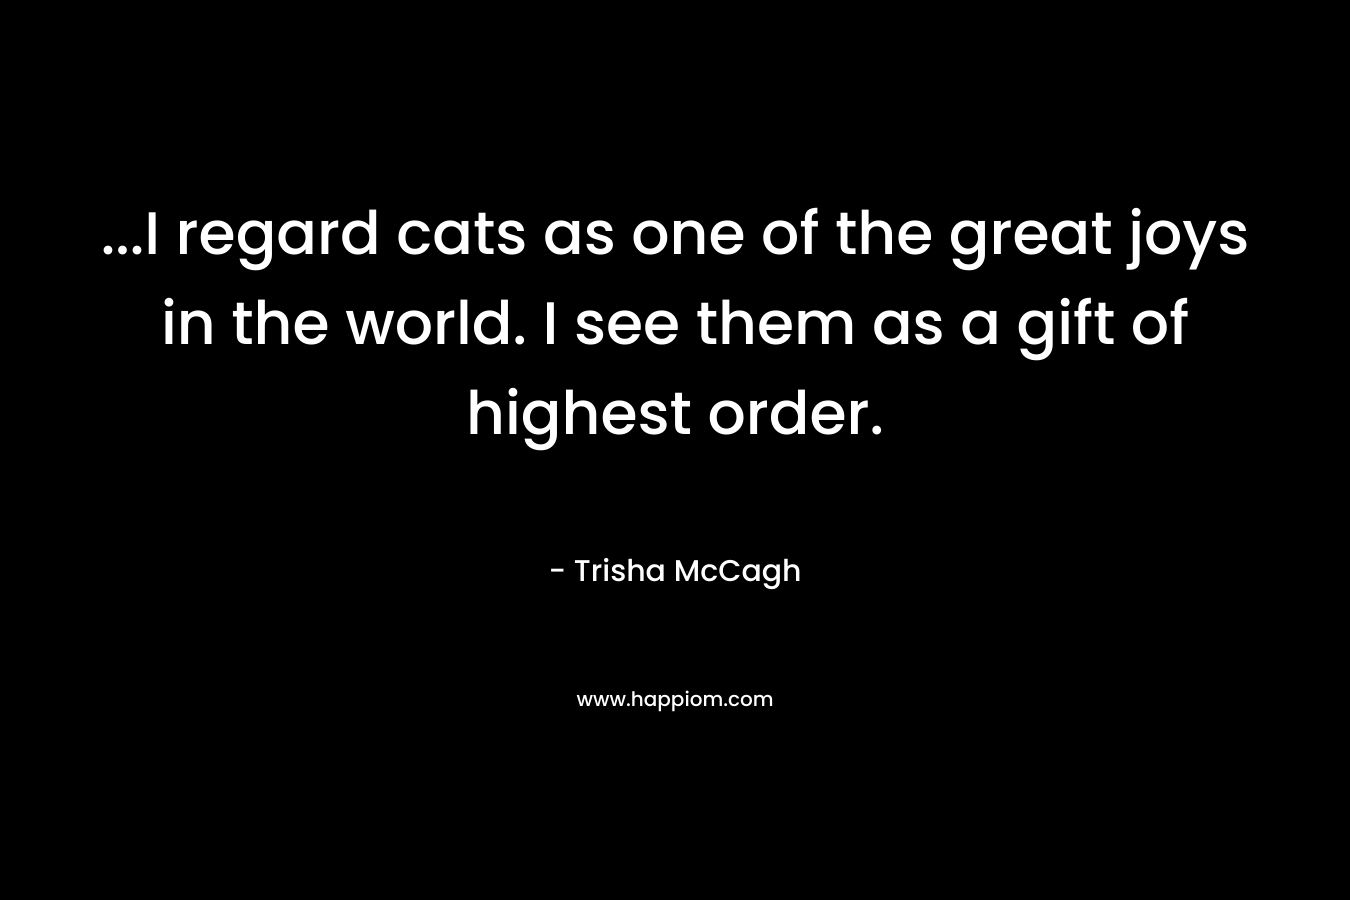 …I regard cats as one of the great joys in the world. I see them as a gift of highest order. – Trisha McCagh